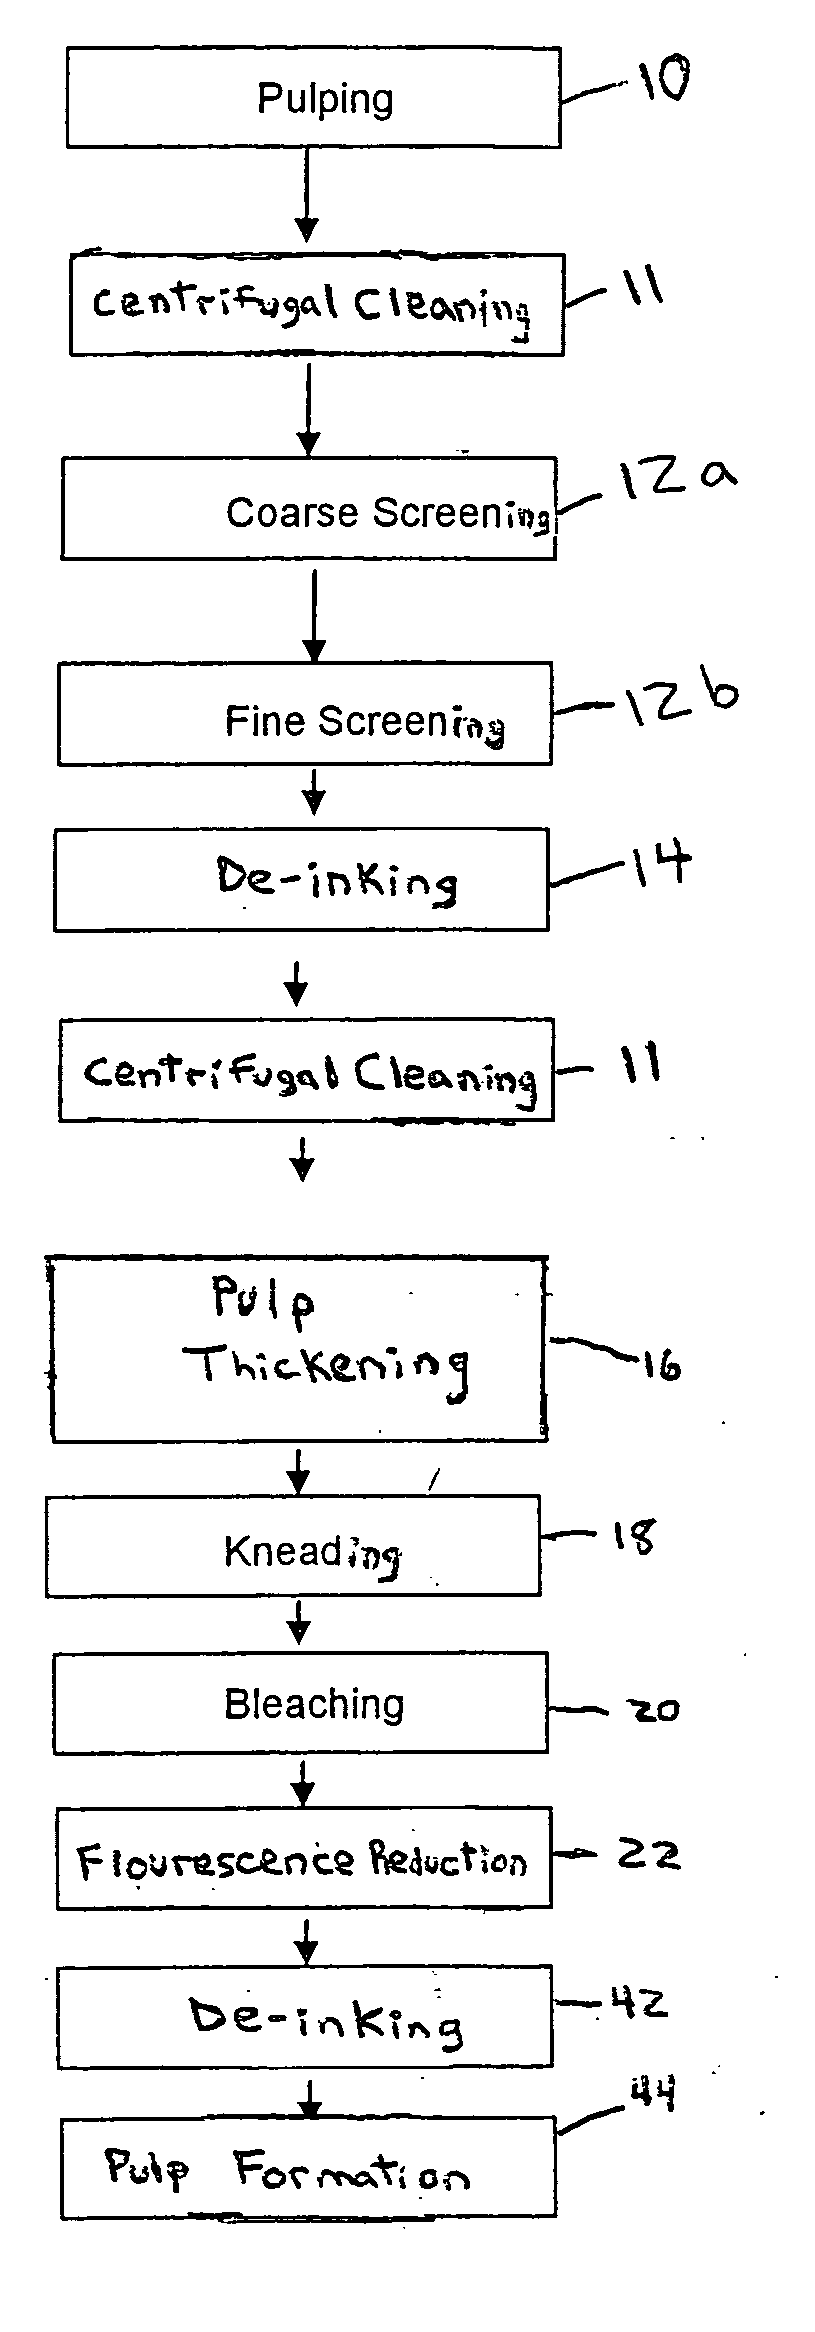 Methods for reducing fluorescence in pulp and paper